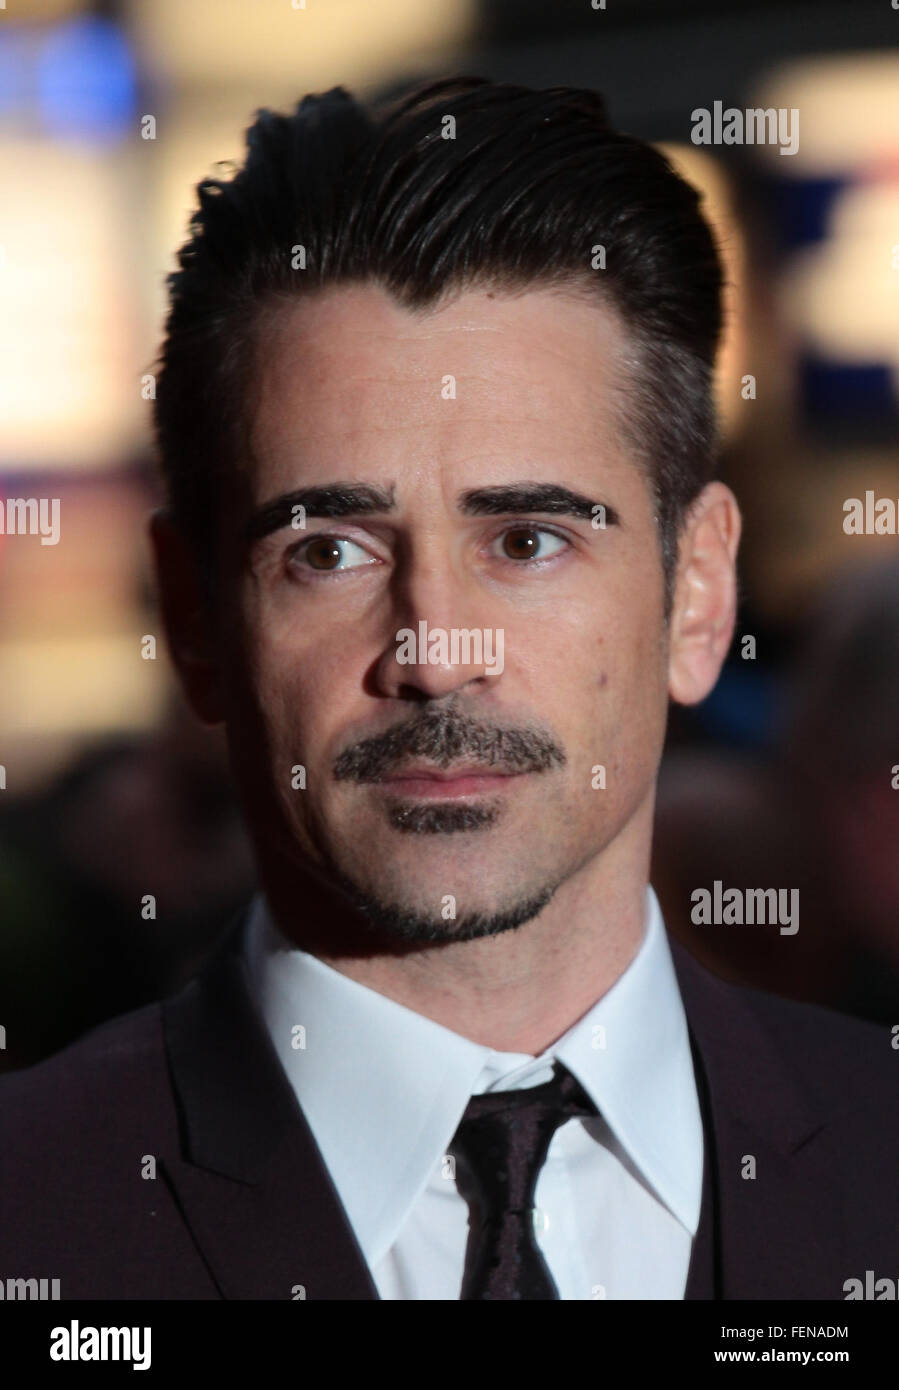 London, UK, 13th Oct 2015: Colin Farrell attends The Lobster premiere, 59th BFI London Film Festival in London Stock Photo